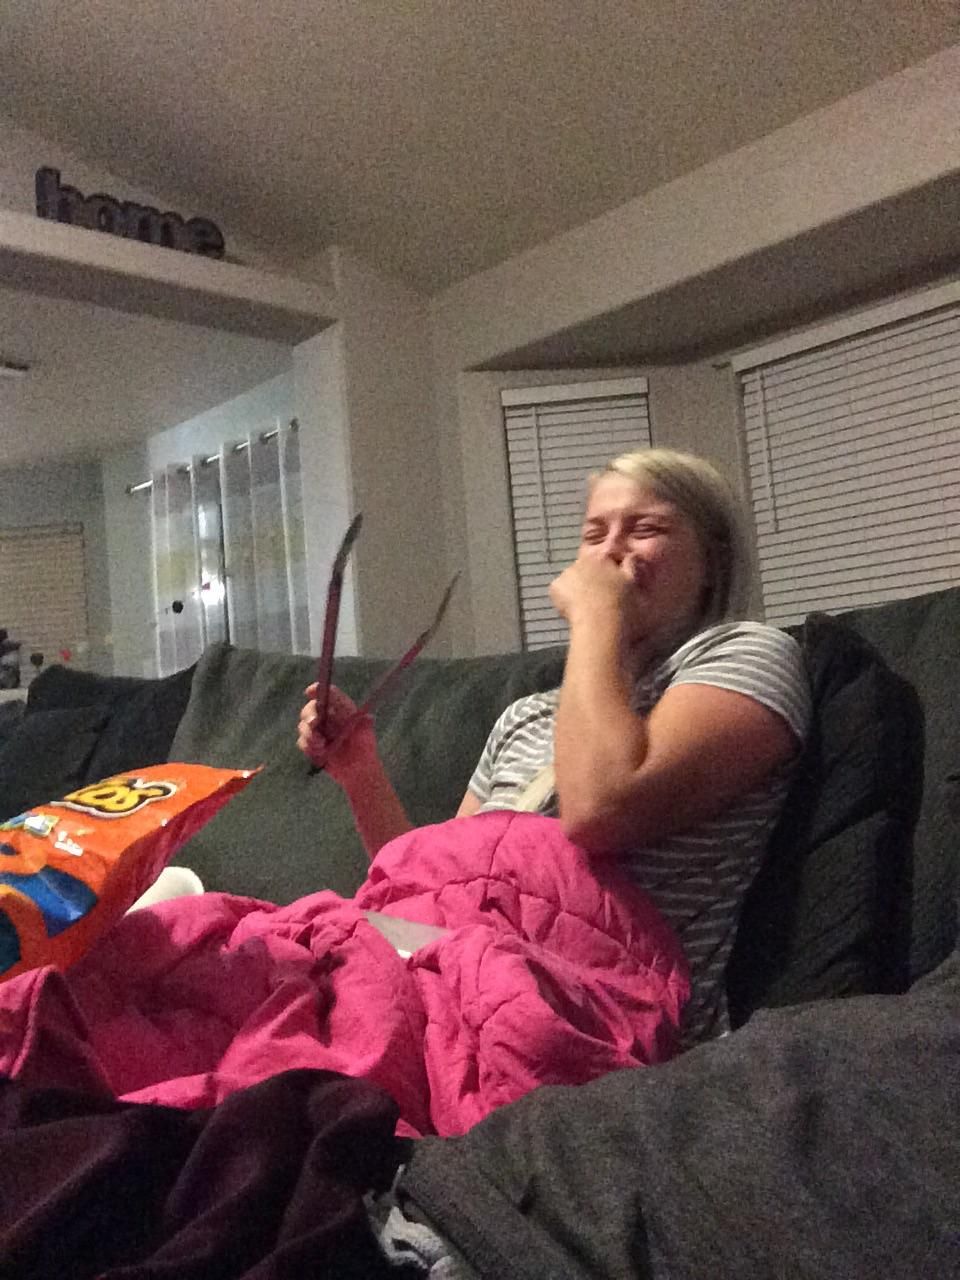 I look over and my wife is eating cheetos with tongs so she doesn't get her hands cheesy. She is a genius and I fell more in love with her